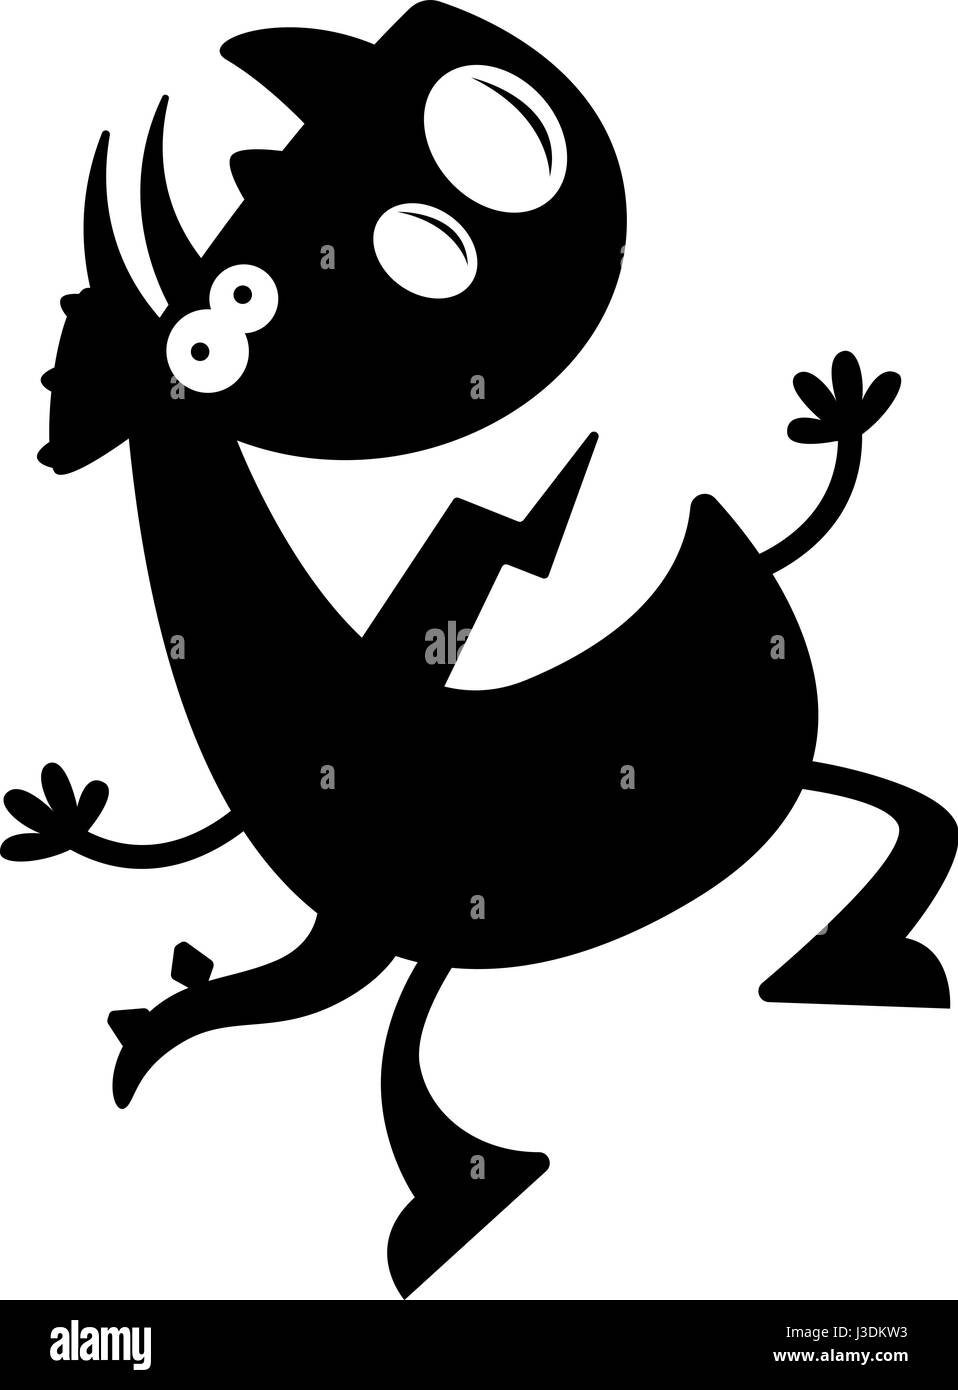 A cartoon silhouette of a triceratops dinosaur jumping. Stock Vector